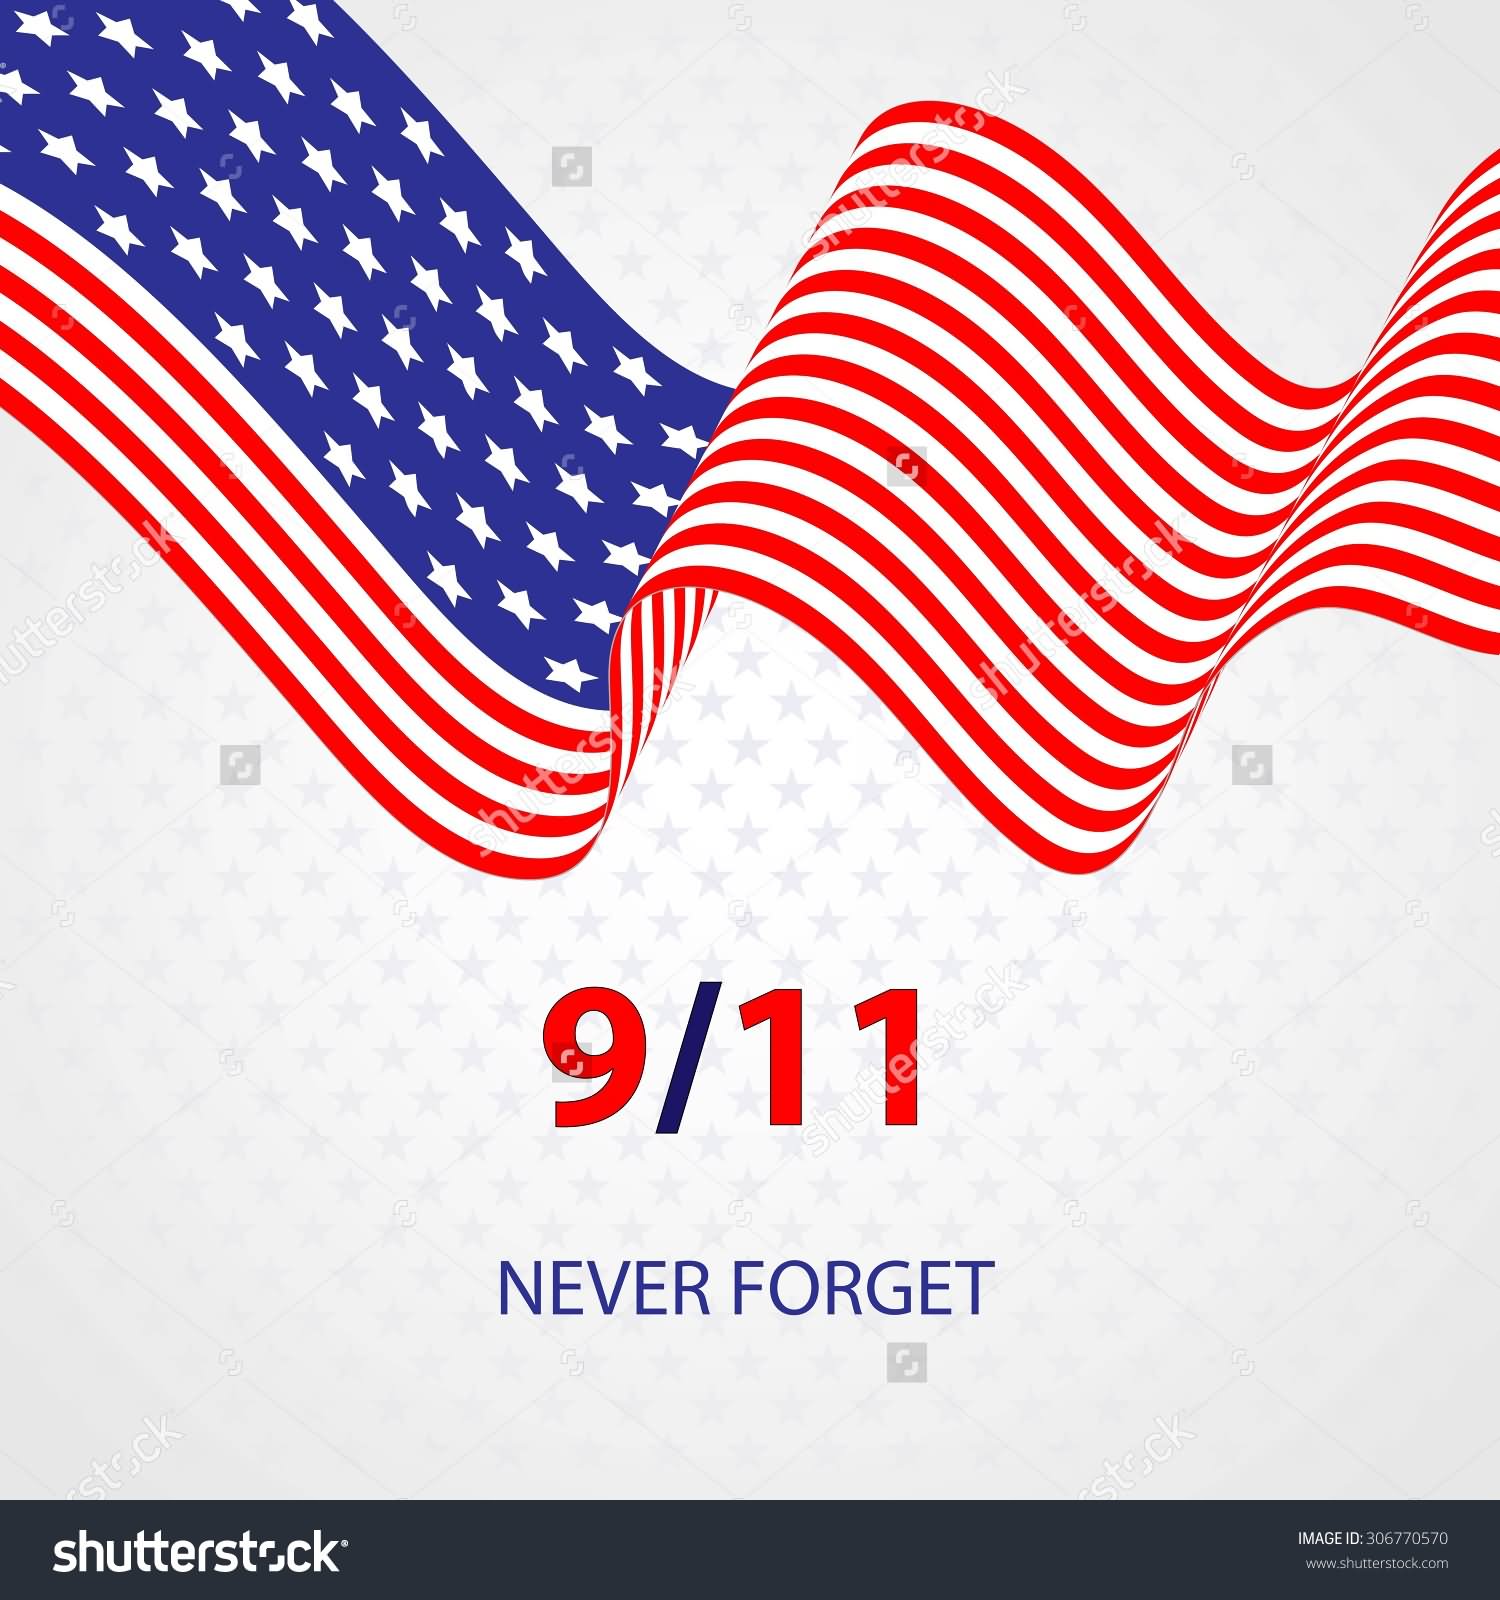 9-11 Never Forget Patriot Day